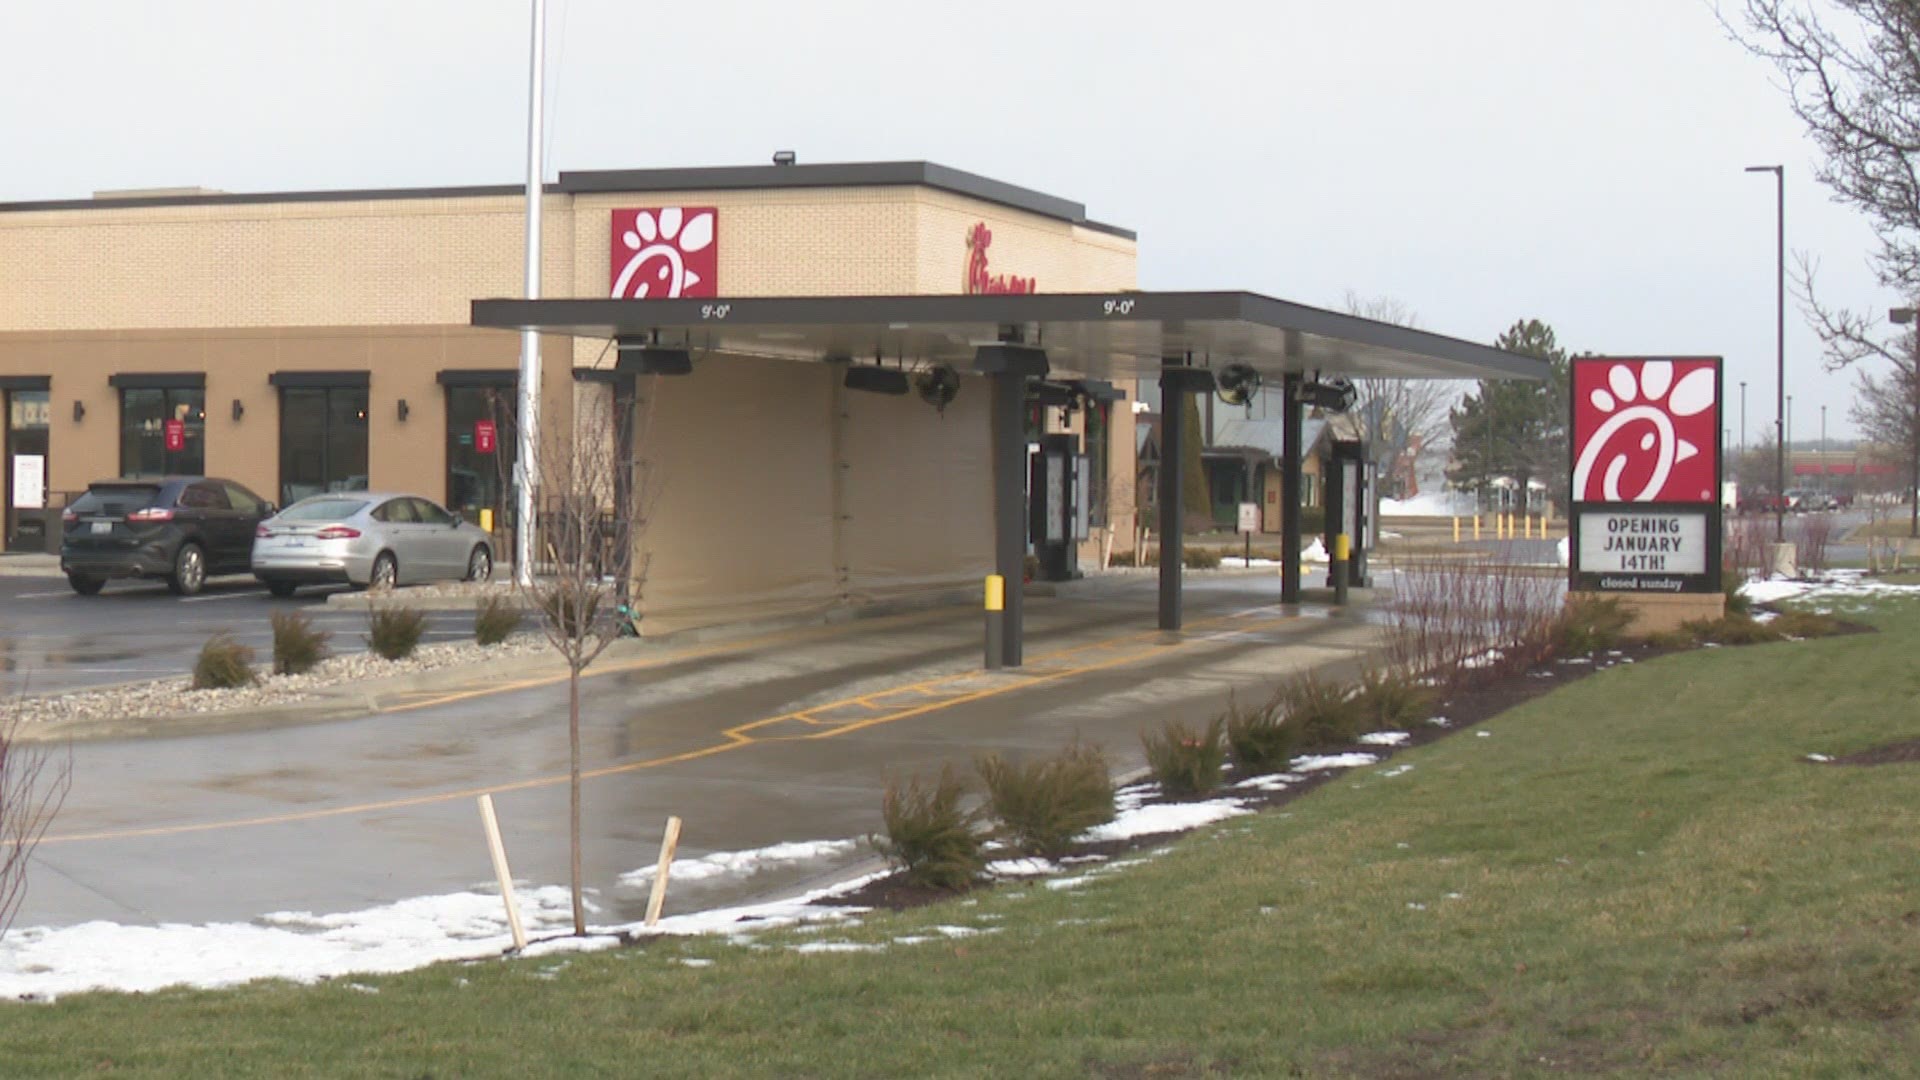 City leaders in Norton Shores are excited that the restaurant is taking the place of a previous restaurant that stood vacant at the site for several years.